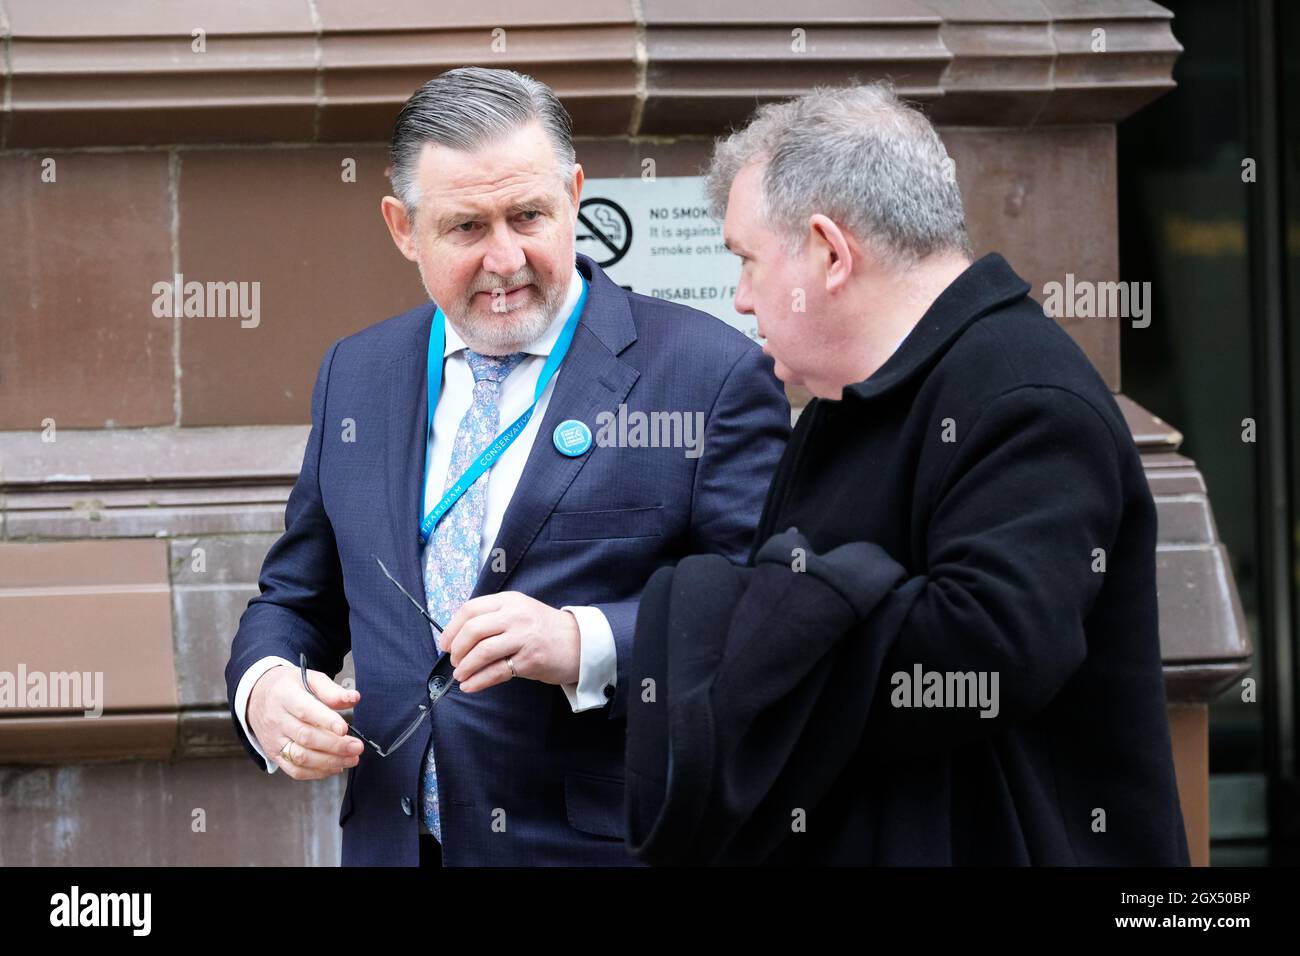 Manchester, UK – Monday 4th October 2021 – Labour MP Barry Gardiner promoting his Stop Fire & Rehire private members bill at the Conservative Party Conference in Manchester. Photo Steven May / Alamy Live News Stock Photo